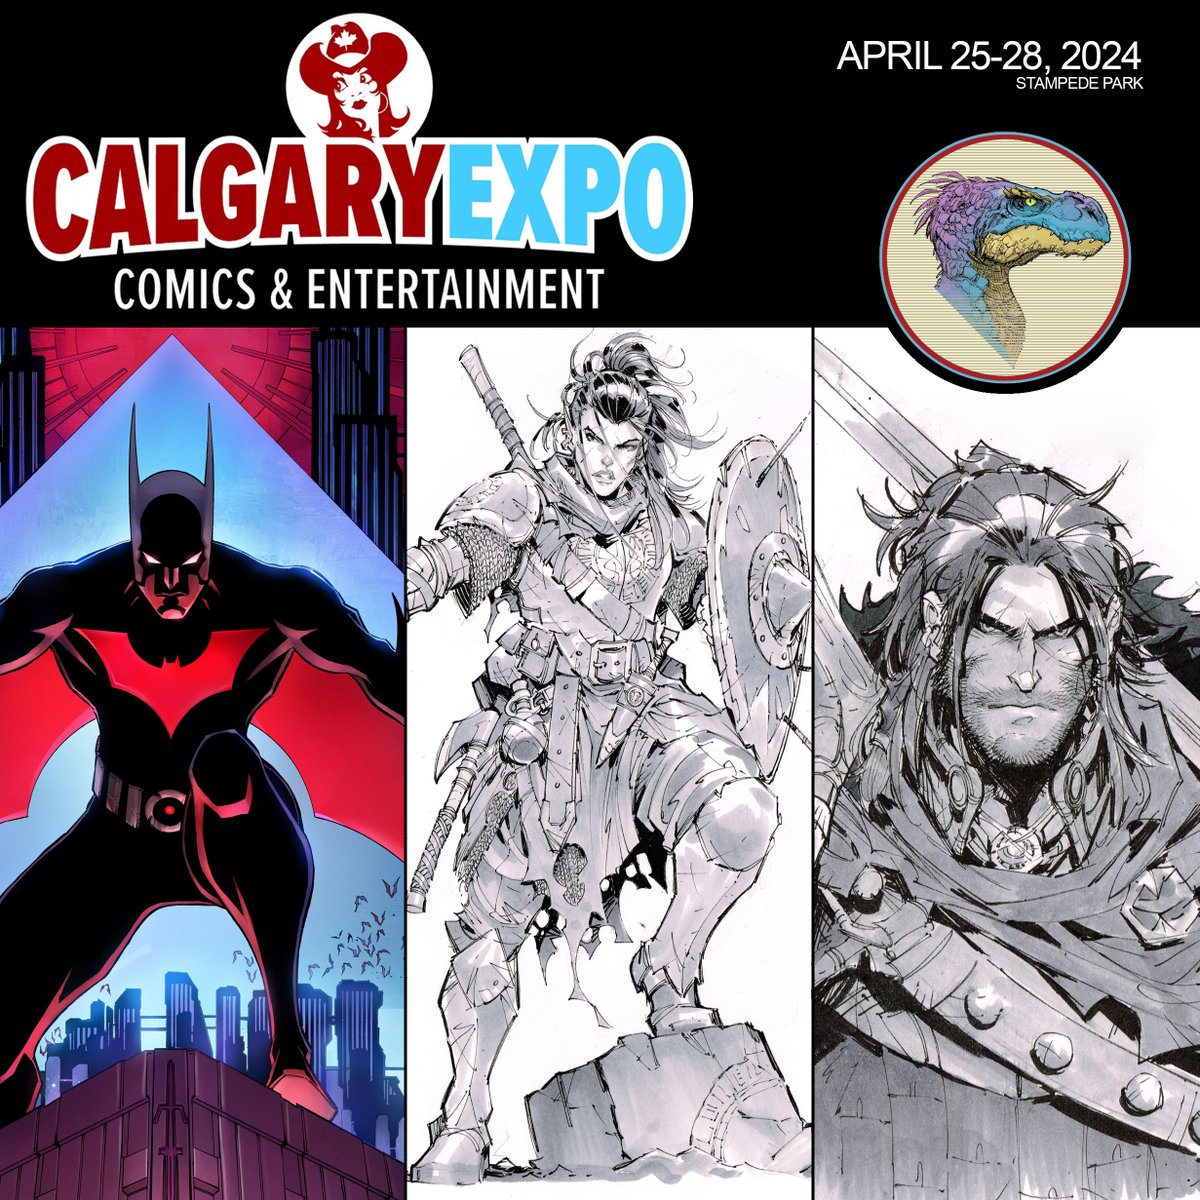 This week/weekend I'll be at @Calgaryexpo booth P49! I'll be taking commissions, and selling original comic art. Stop by and say hi! #calgaryexpo2024